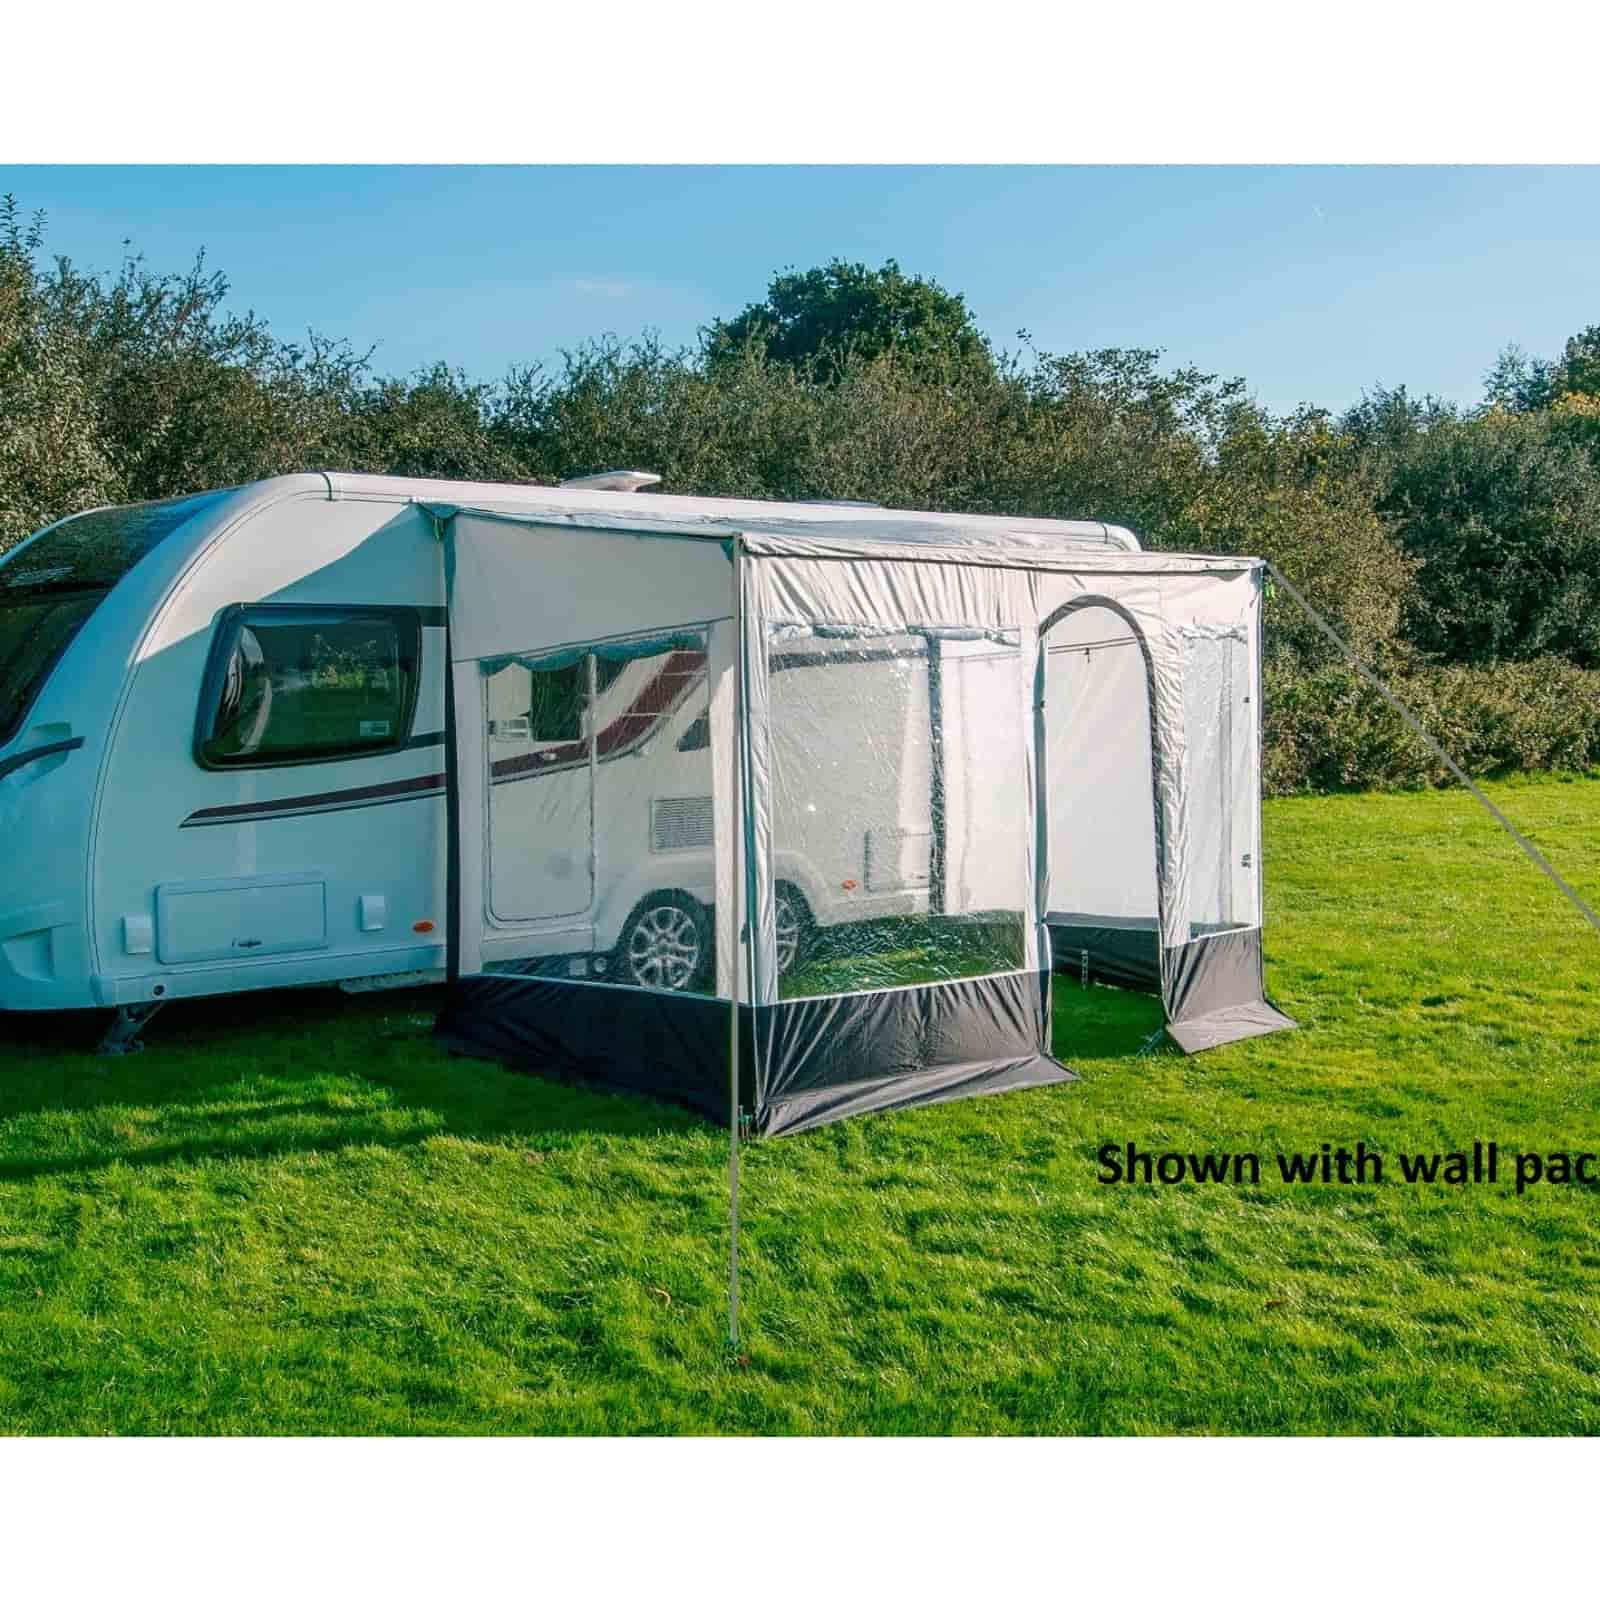 Sunncamp Protekta 13 Wall Pack for Awning Canopy - Quality Caravan Awnings